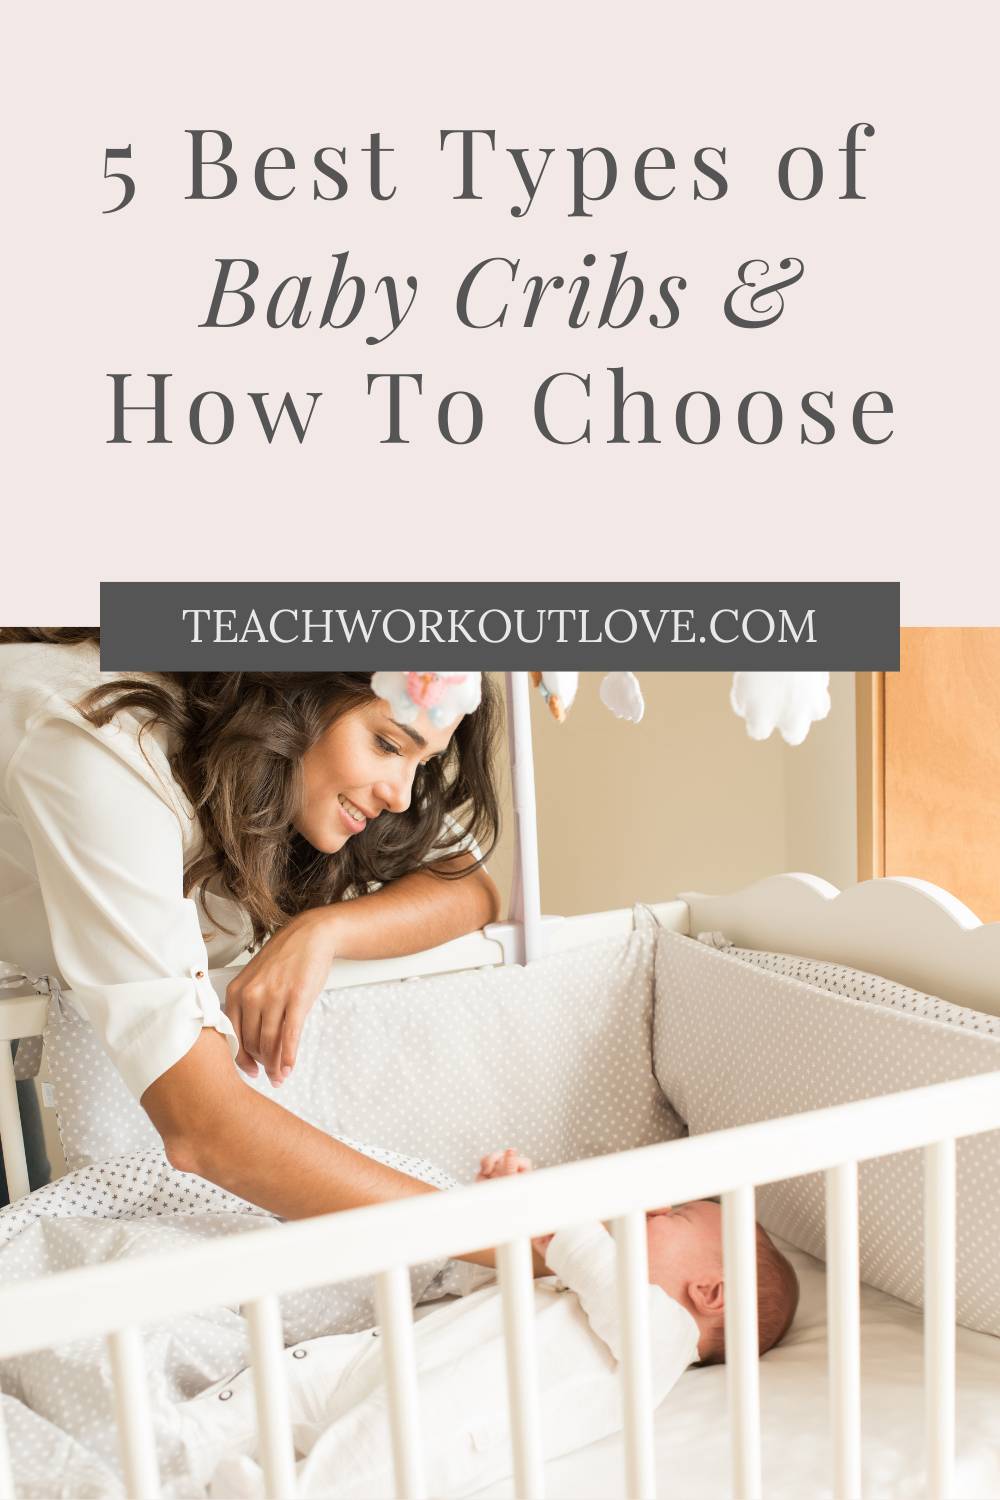 In this article we have mentioned 5 types of baby cribs and also explained how to choose the right one for your baby.